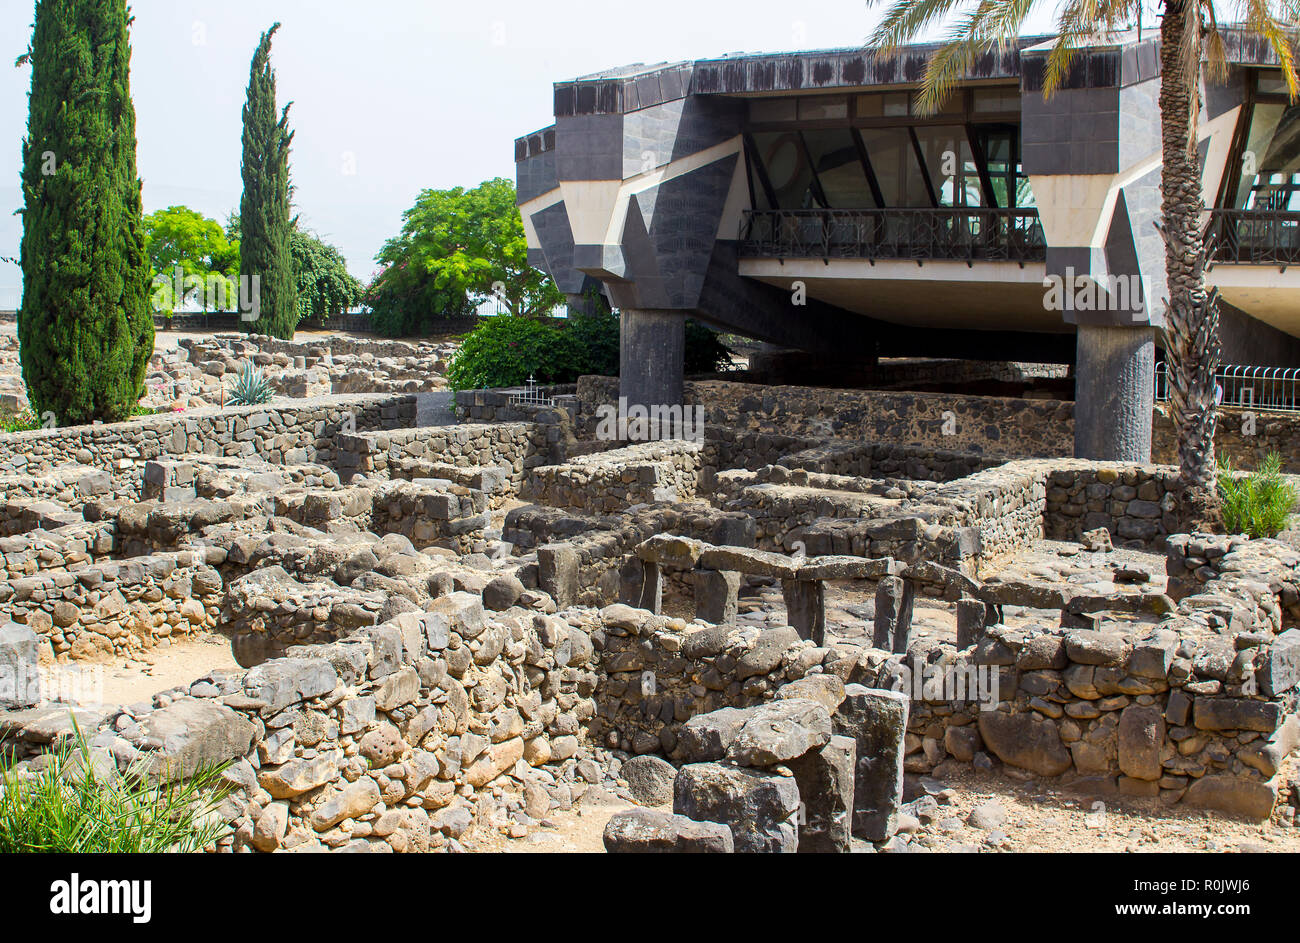 3 May 2018 The excavated ruins close to the first century Jewish Synagogue overlooked by a modern building in the ancient town of Capernaum in Israel Stock Photo